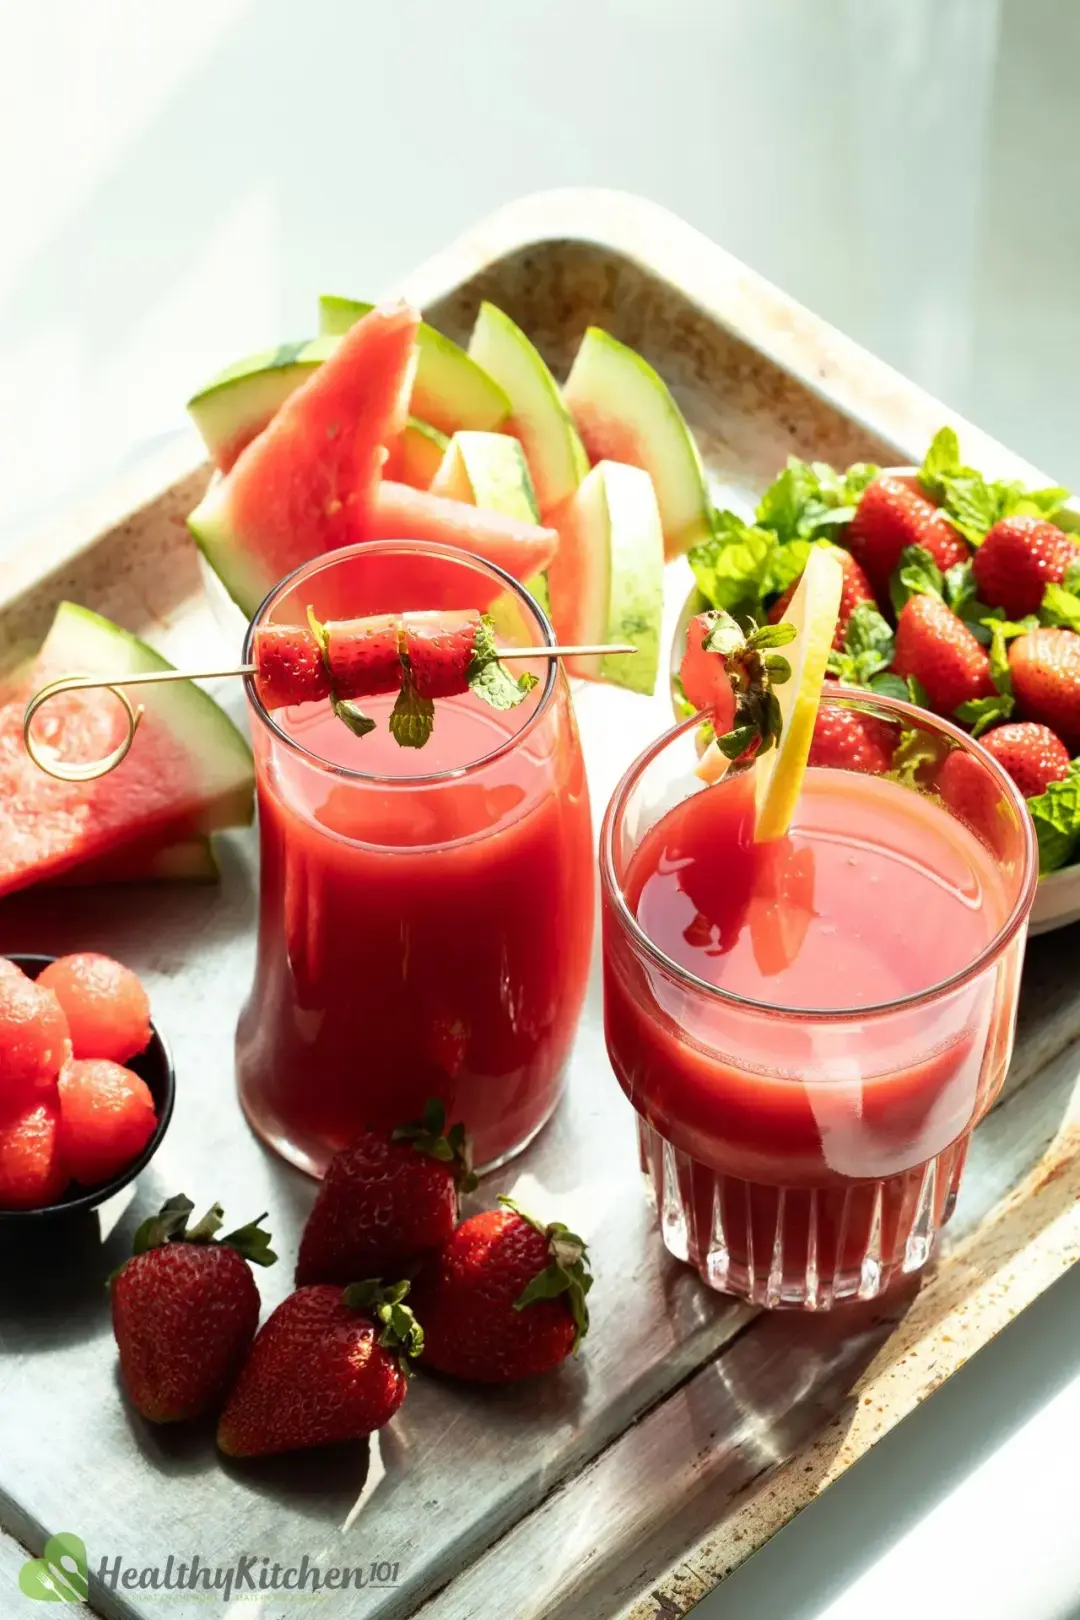 Two glasses of red juice in a steel tray decorated with strawberries and lemon surrounded by strawberries and watermelon